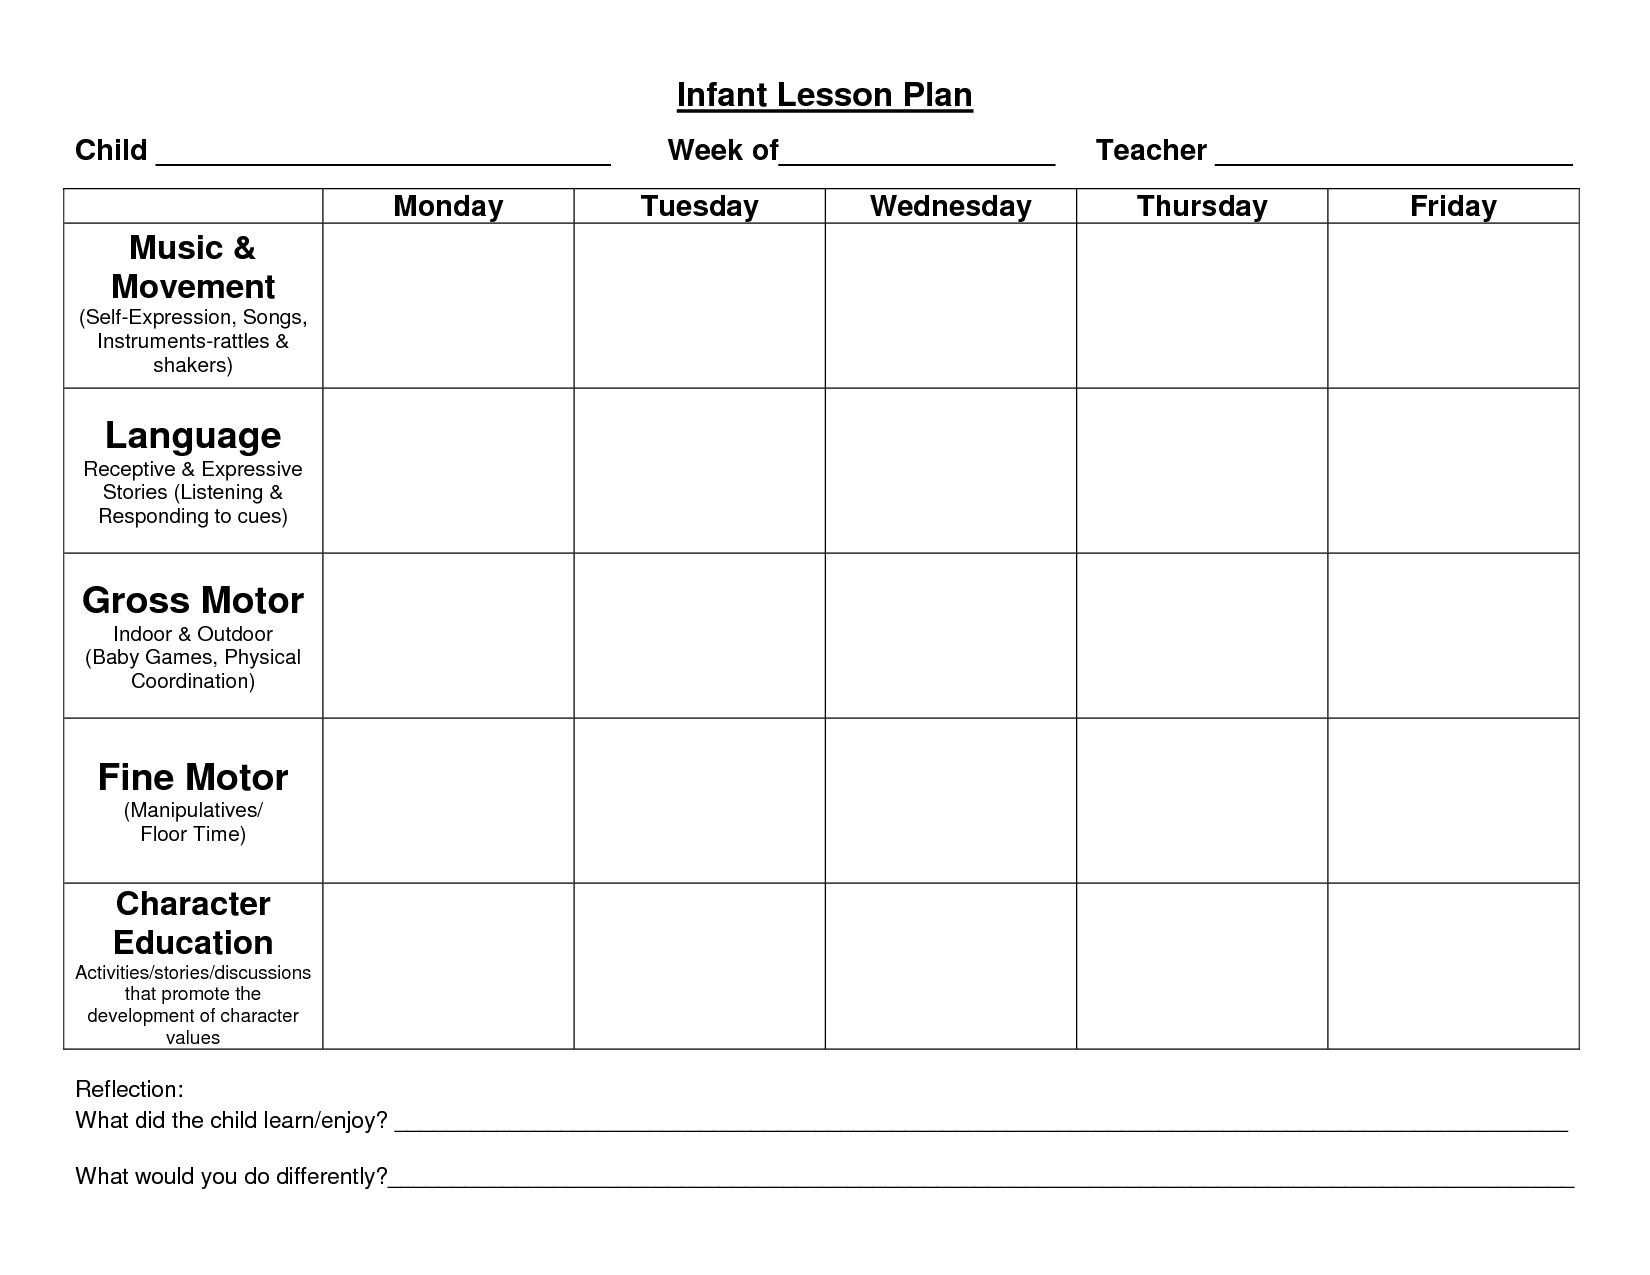 Monthly Lesson Plan Template 2019 | Daycare Lesson Plans